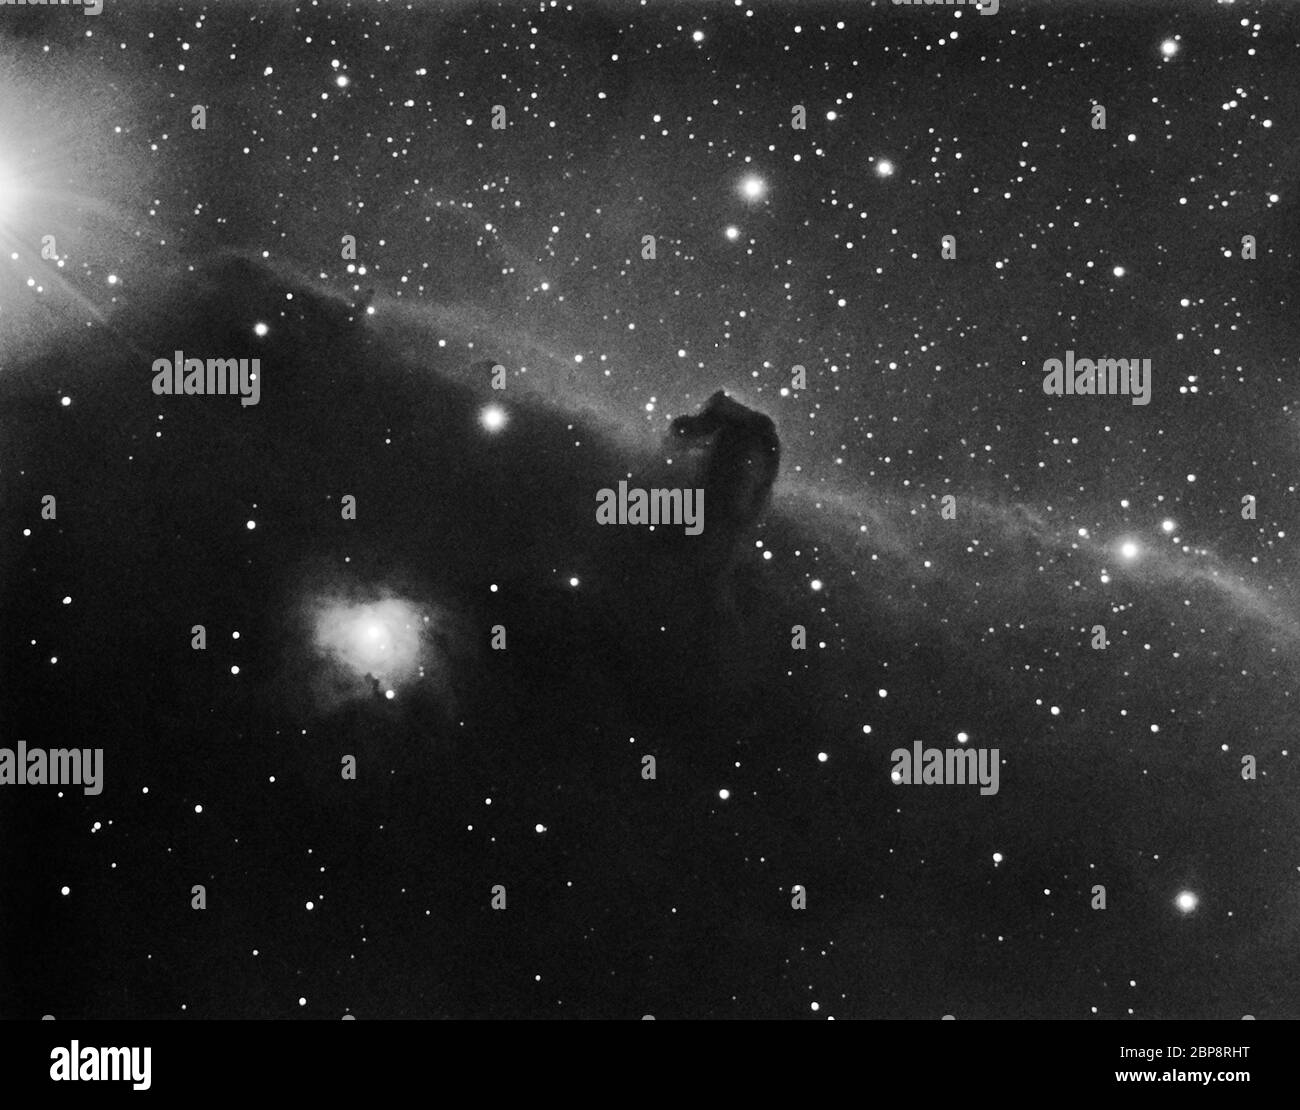 Barnard 33, the Horsehead Nebula in the constellation Orion with the reflection nebula NGC 2023, photographed with a mono ccd camera from earth Stock Photo